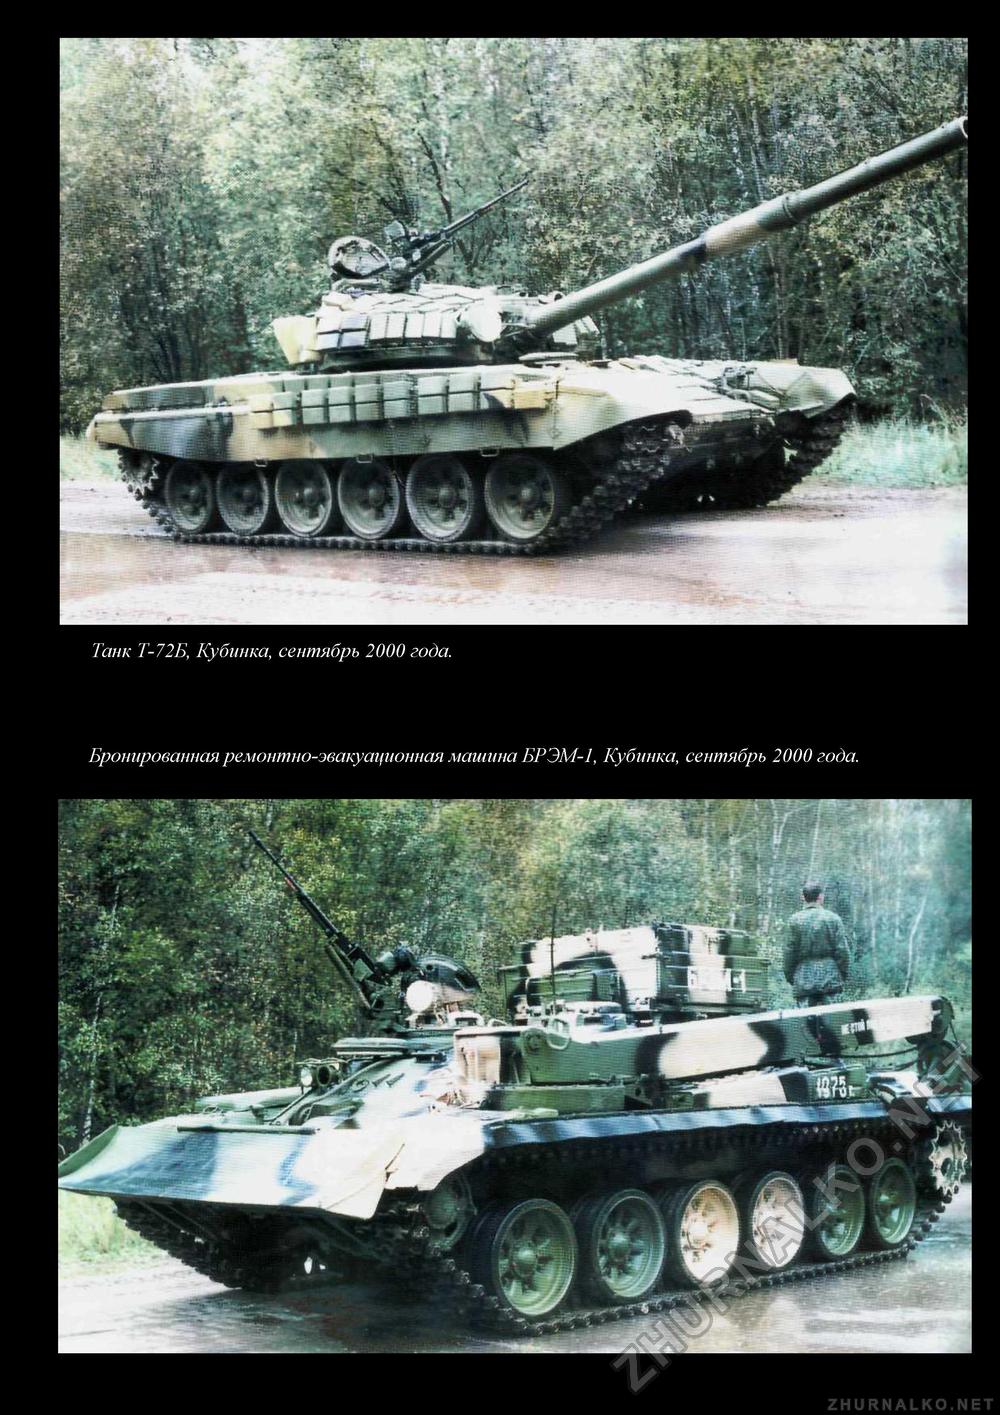  Special -  T-72,  67